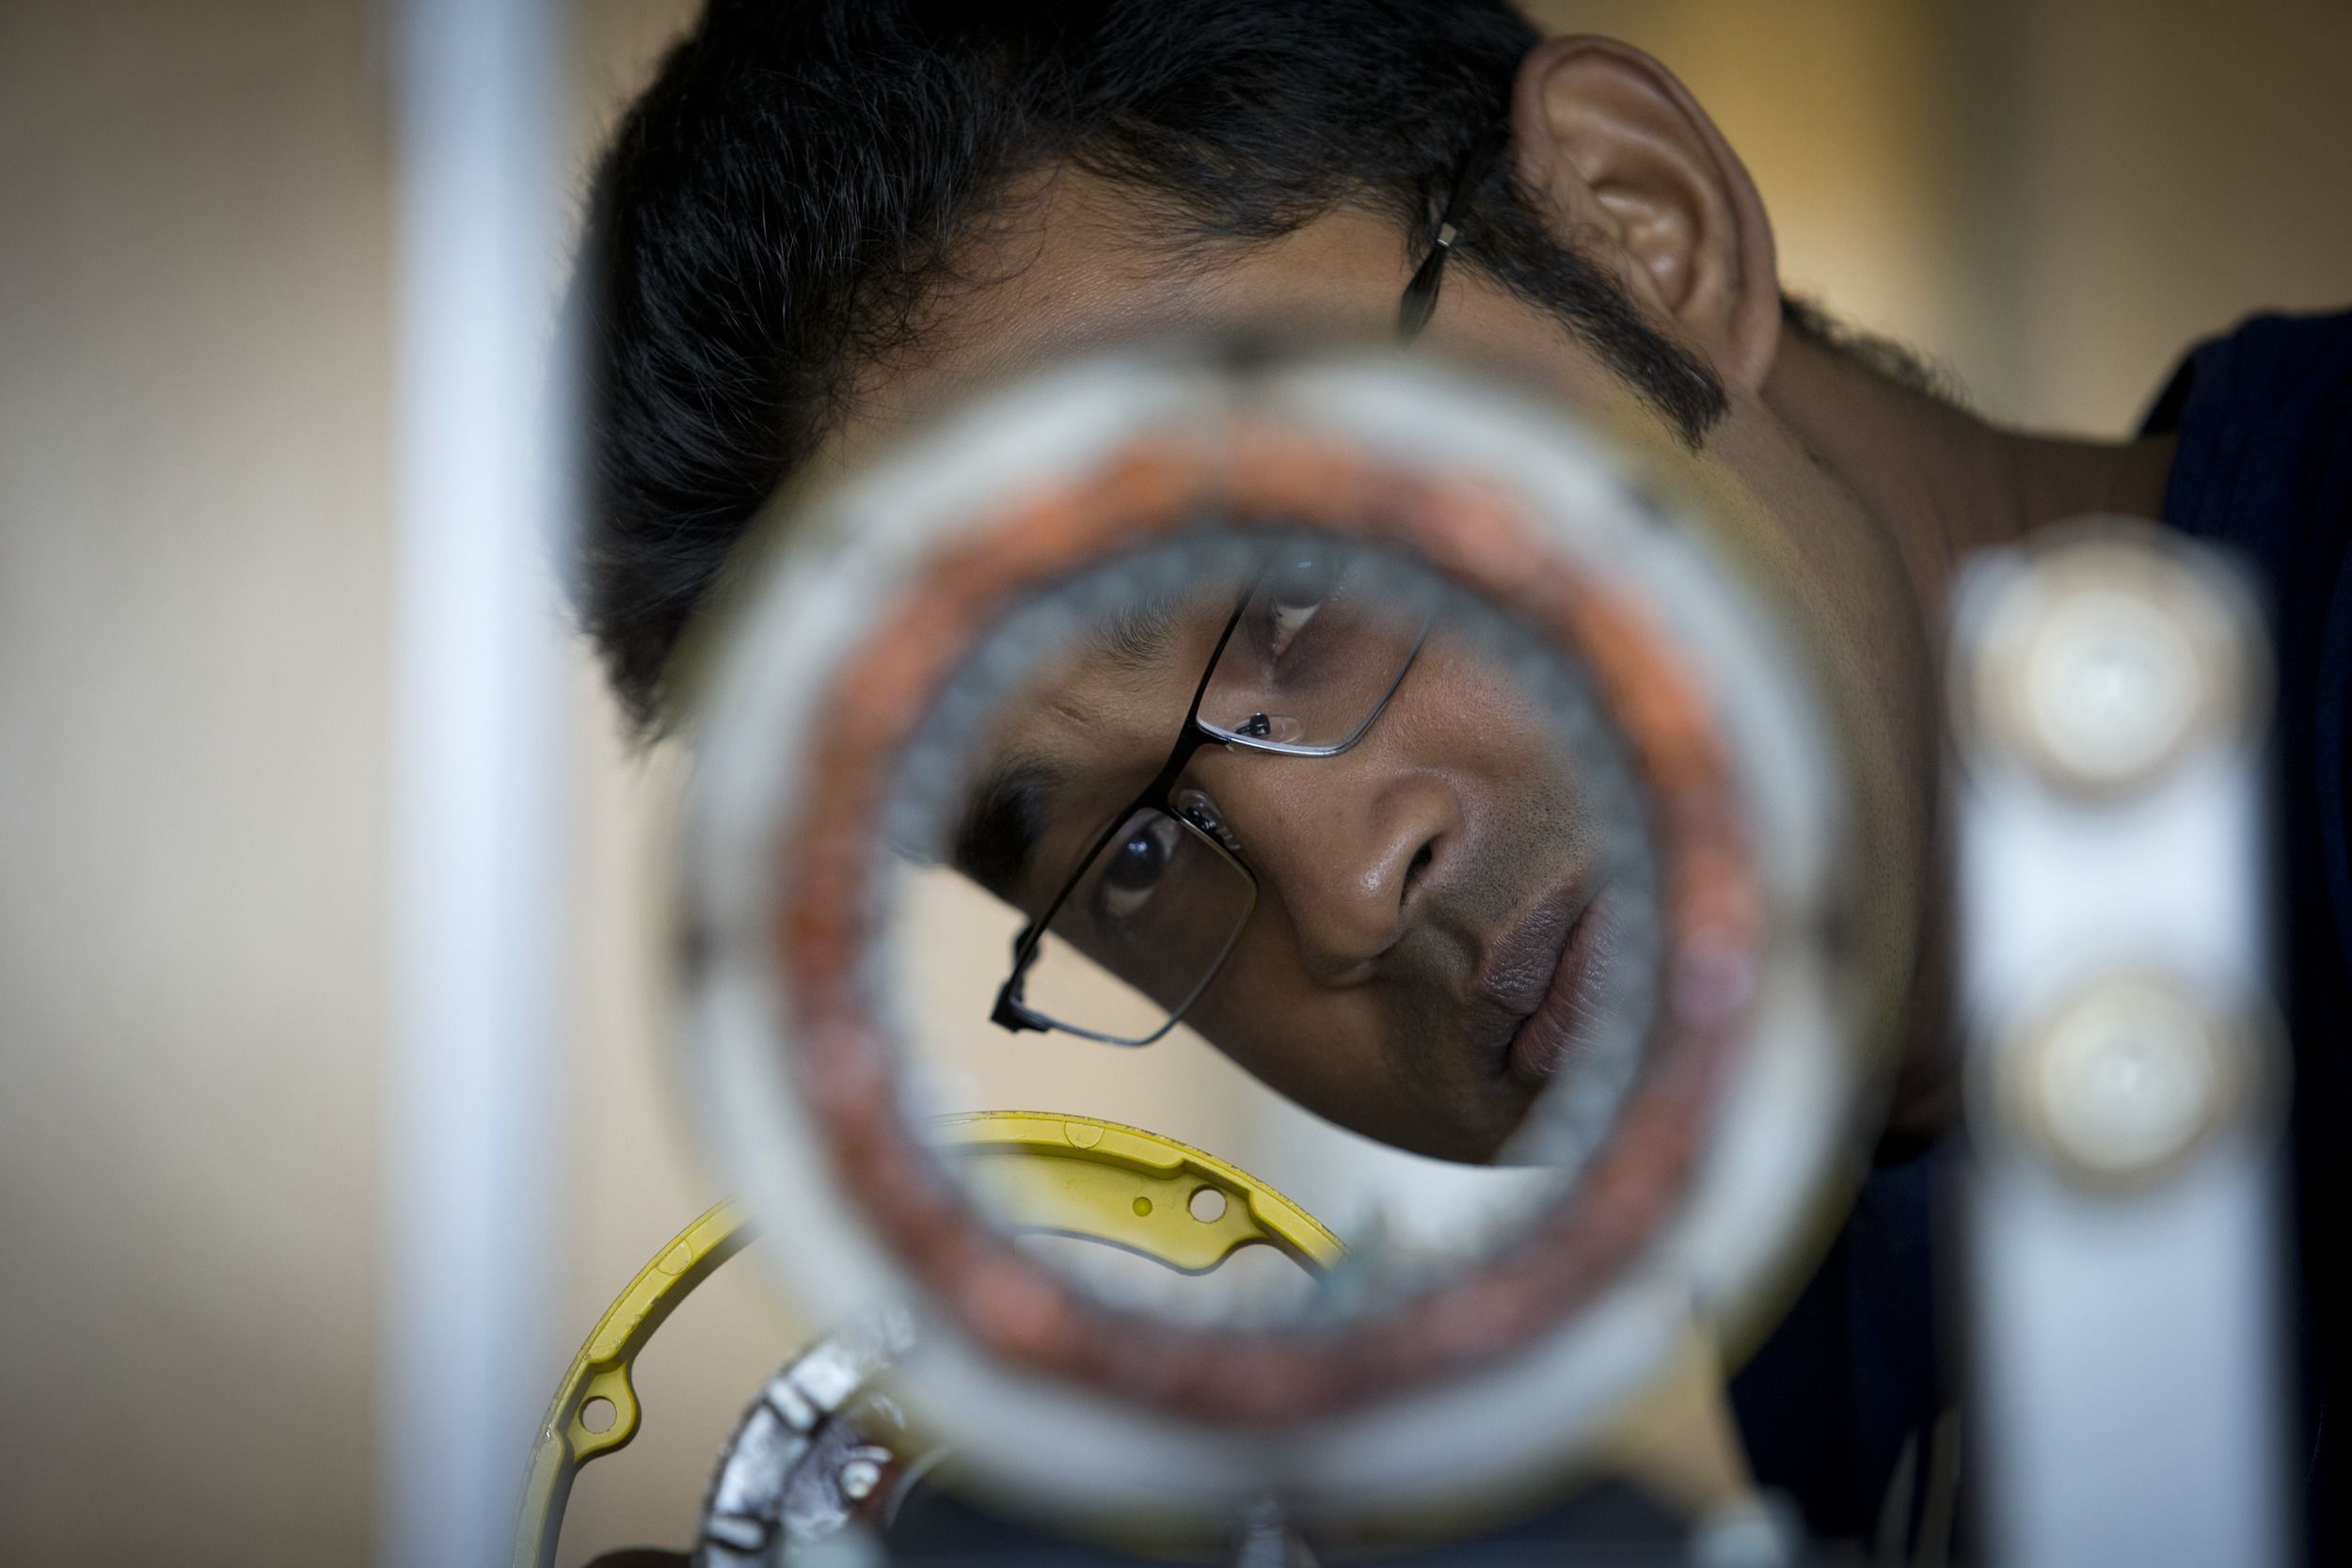 A student face can be seen through a circular engineering device.